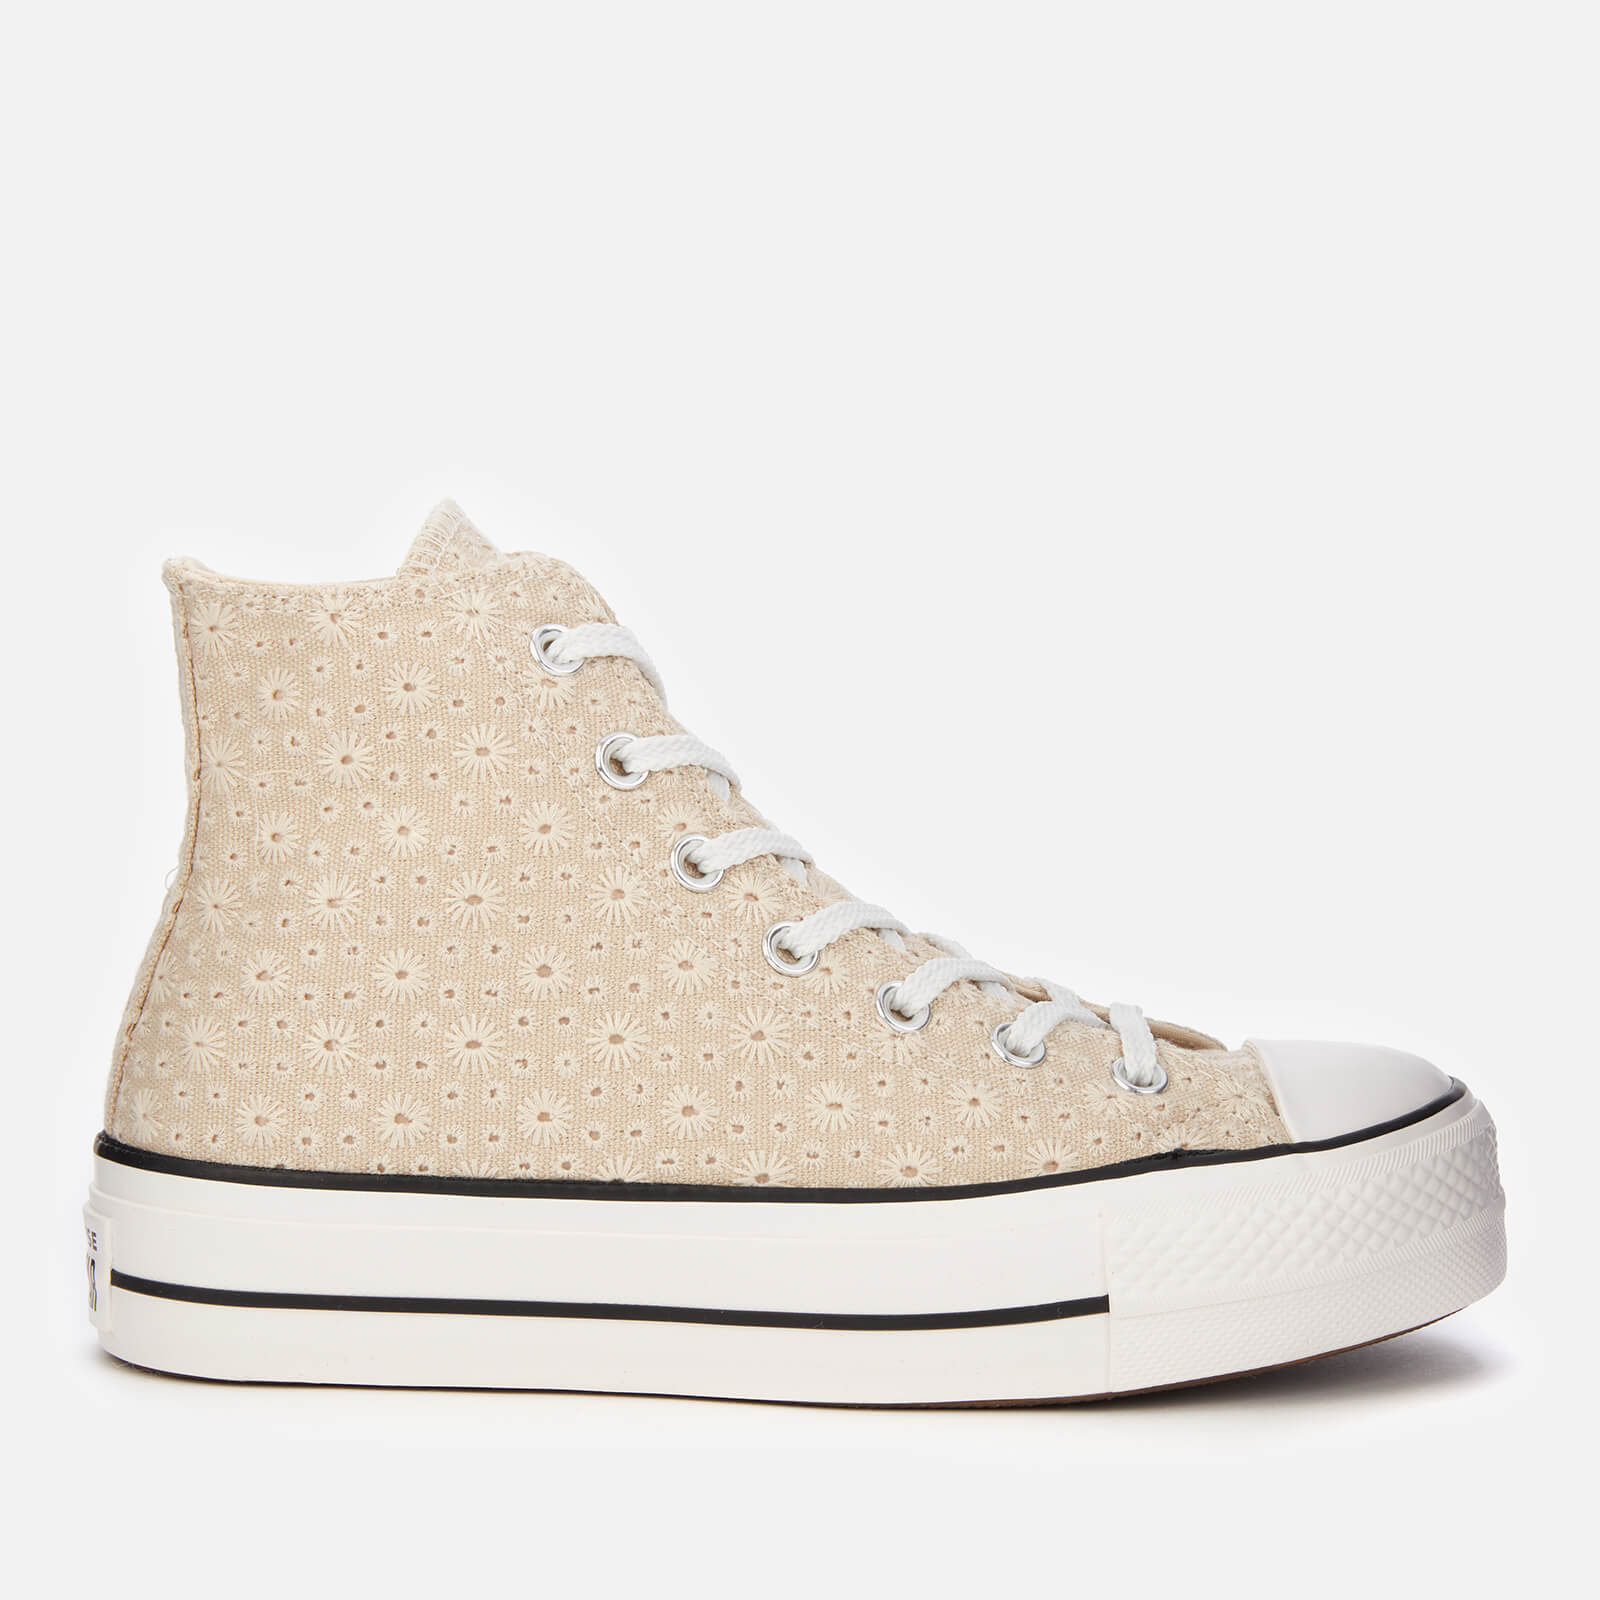 Converse Women's Chuck Taylor All Star Lift Hi-Top Trainers - Farro/Natural Ivory/Vintage White - UK 3